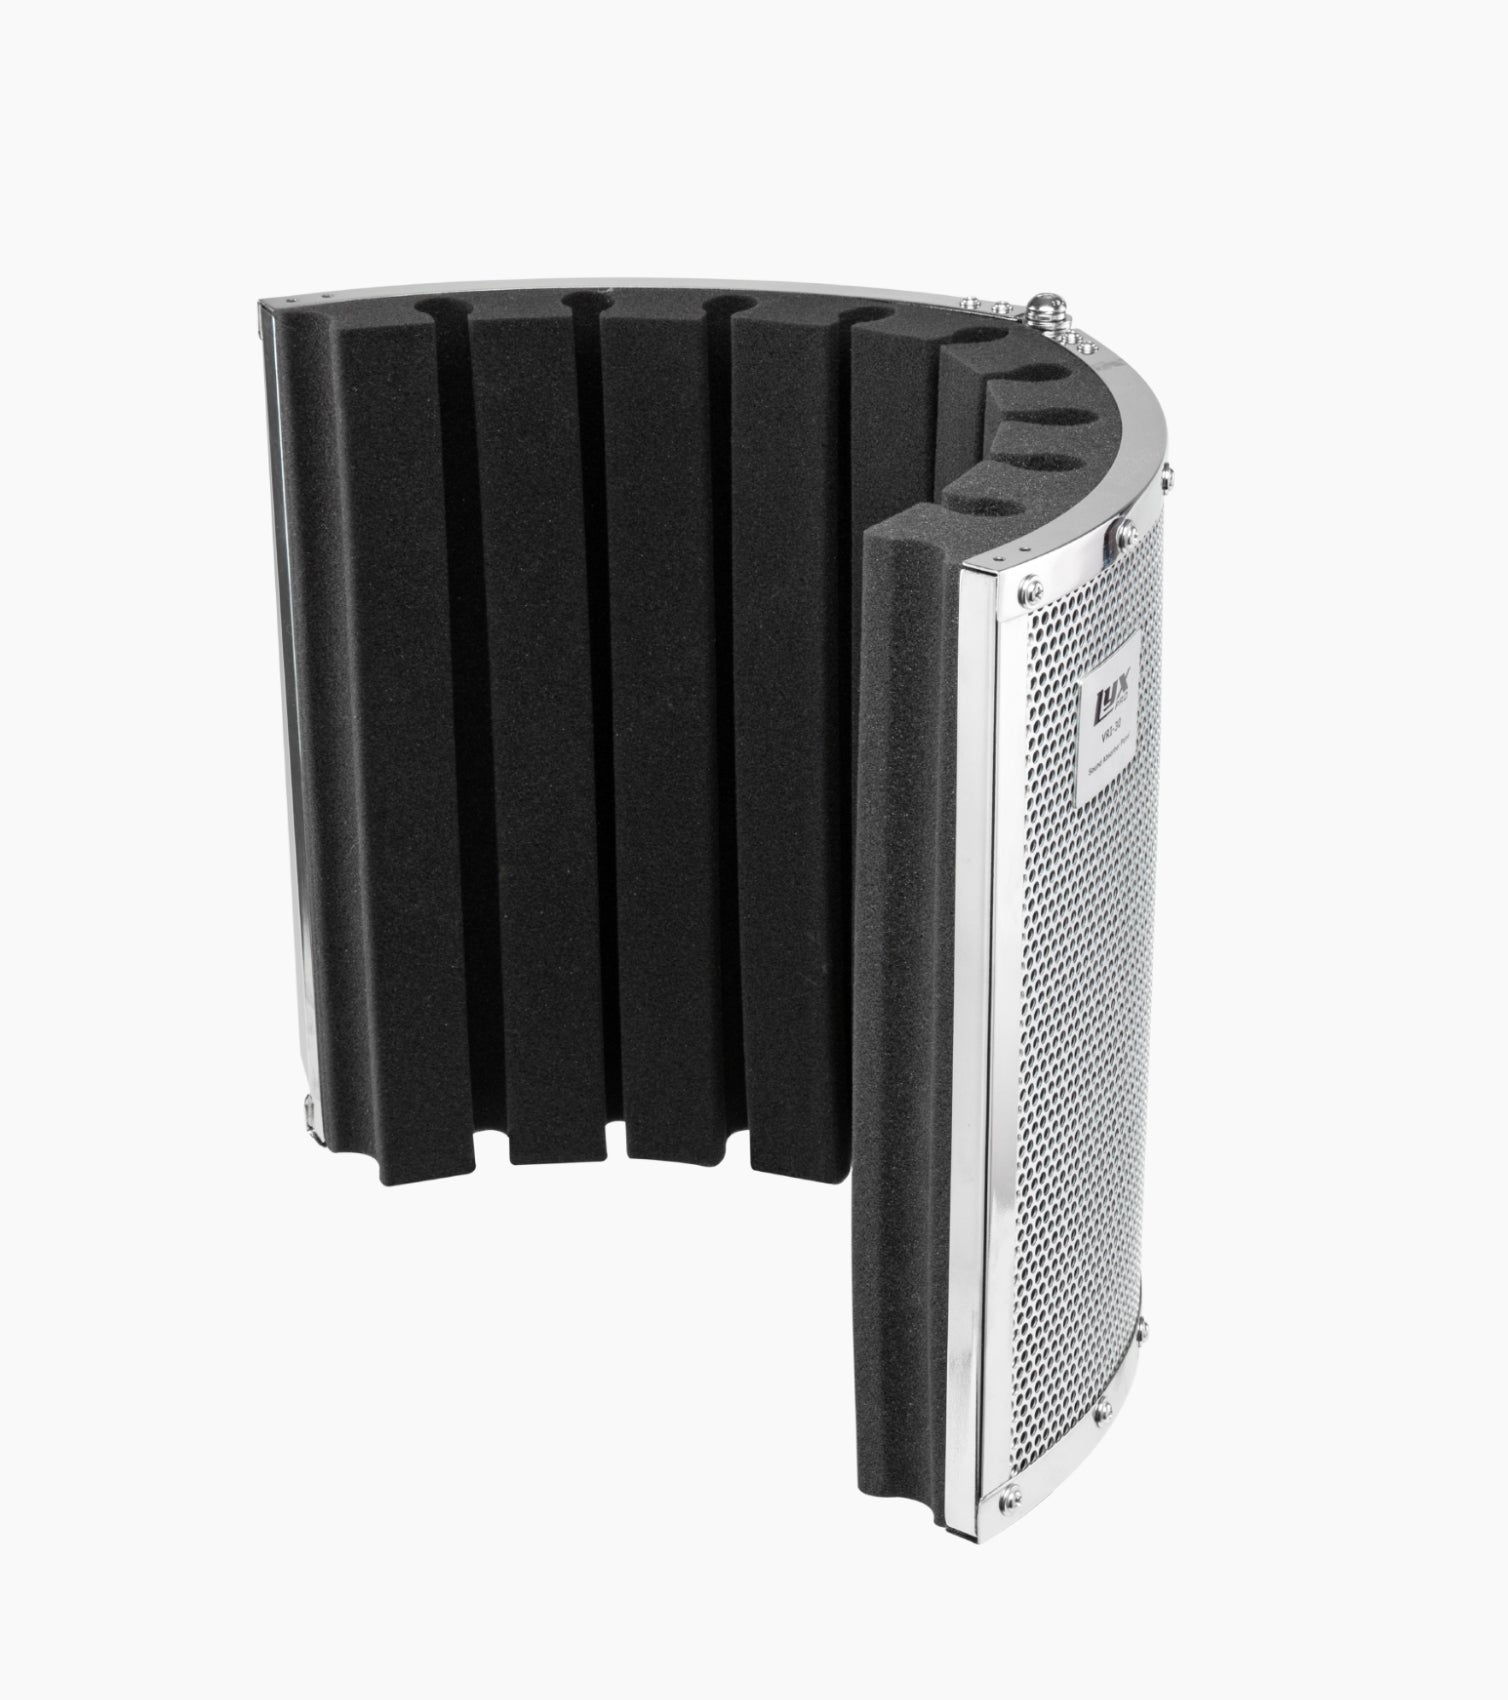 Sound Absorbing Vocal Shield with Collapsible Panels - Side View